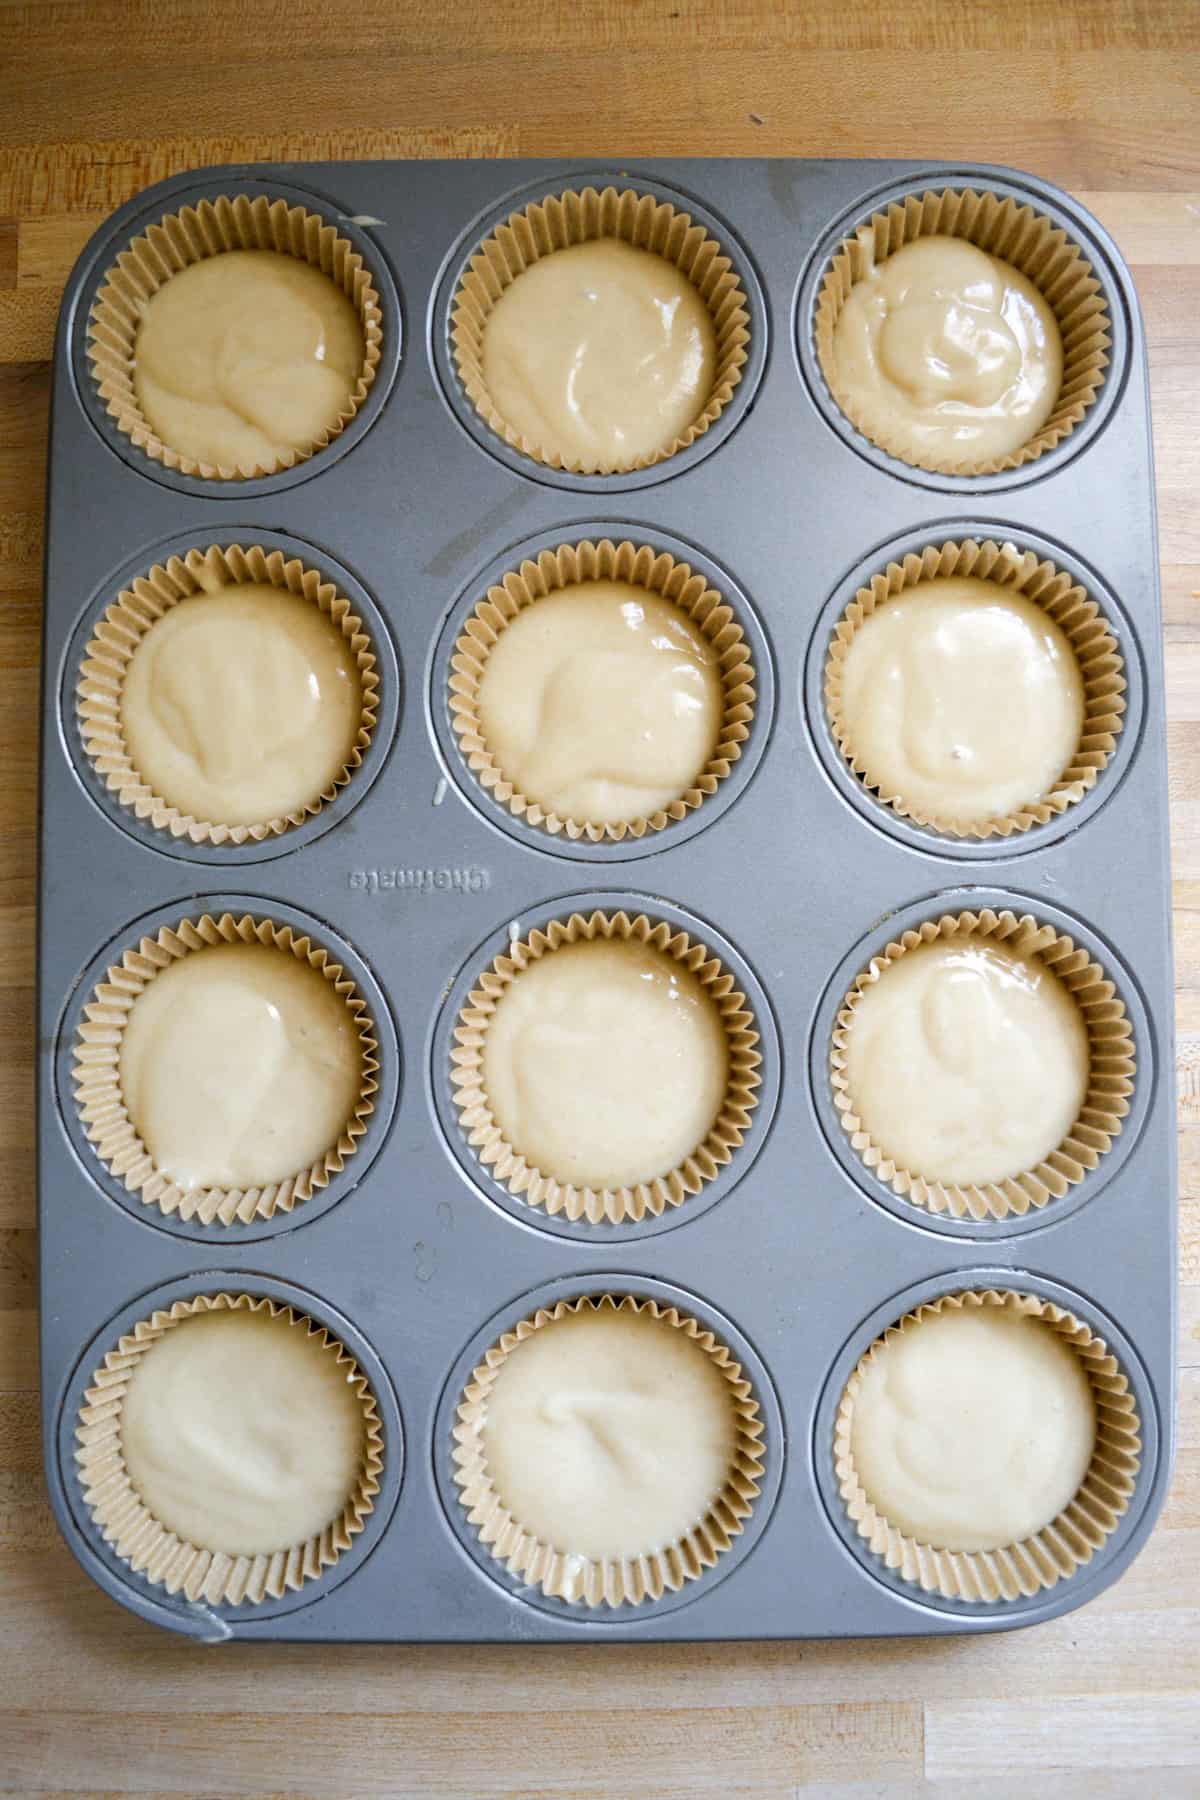 Cupcake batter portioned into a lined cupcake pan.